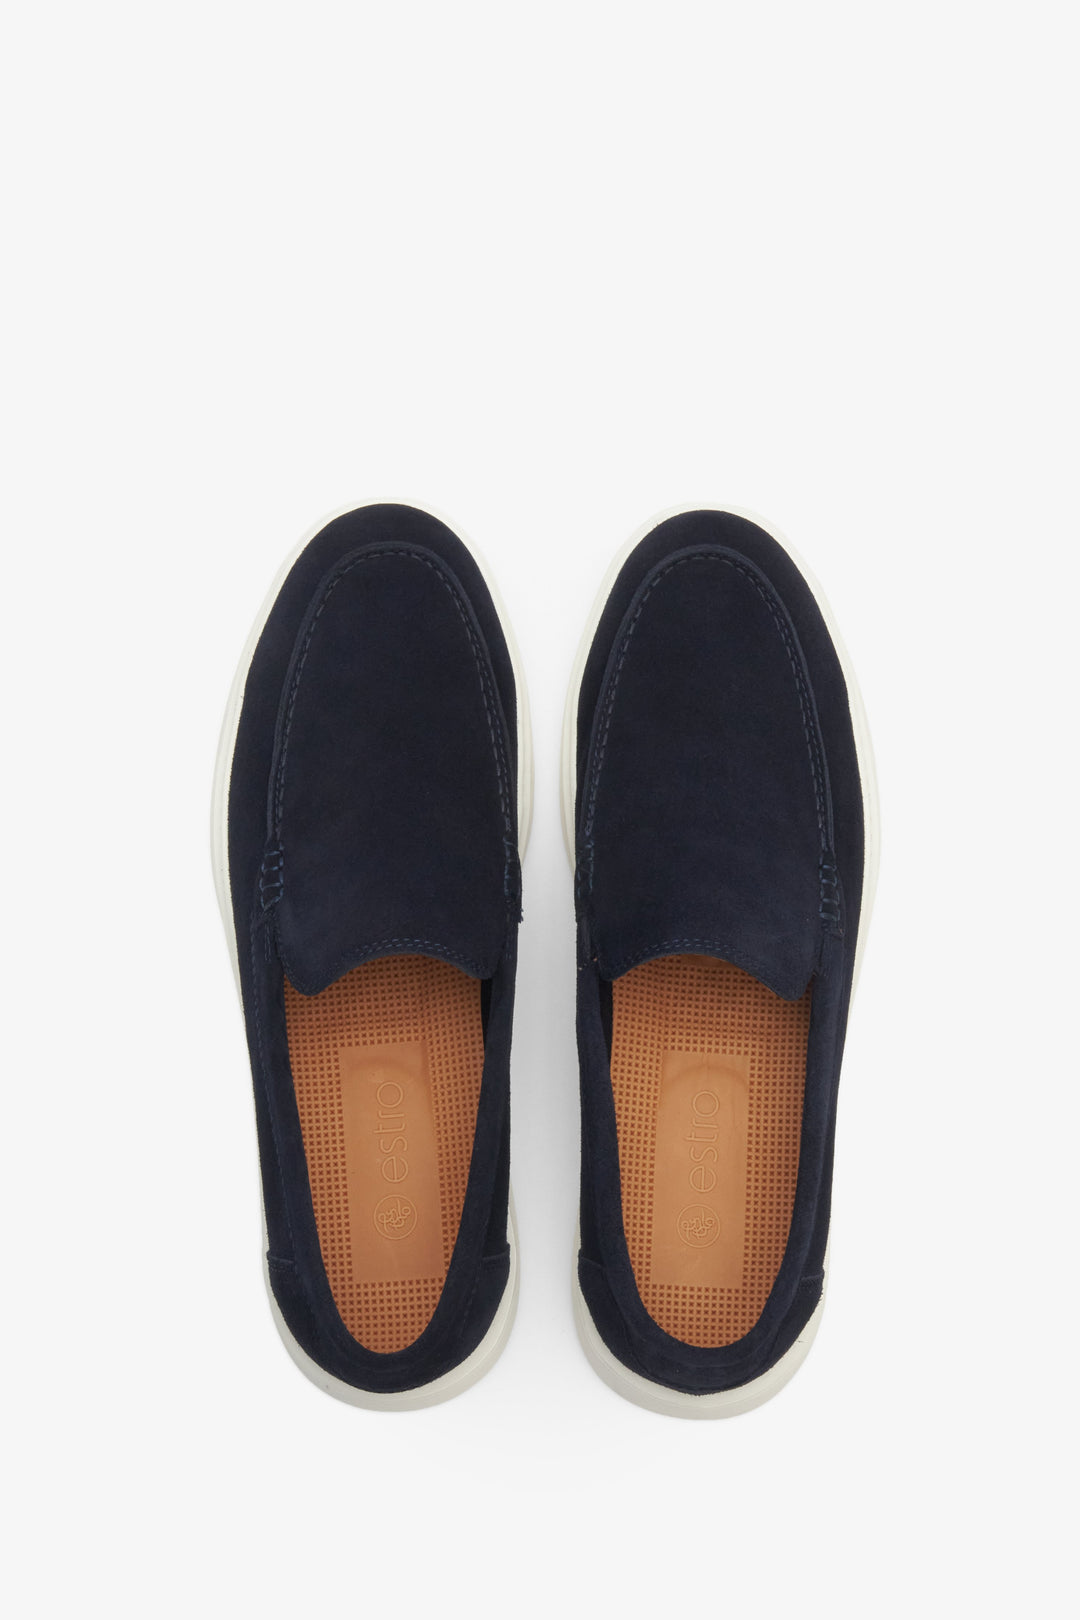 Navy blue velour men's loafers for spring and fall - Estro brand.